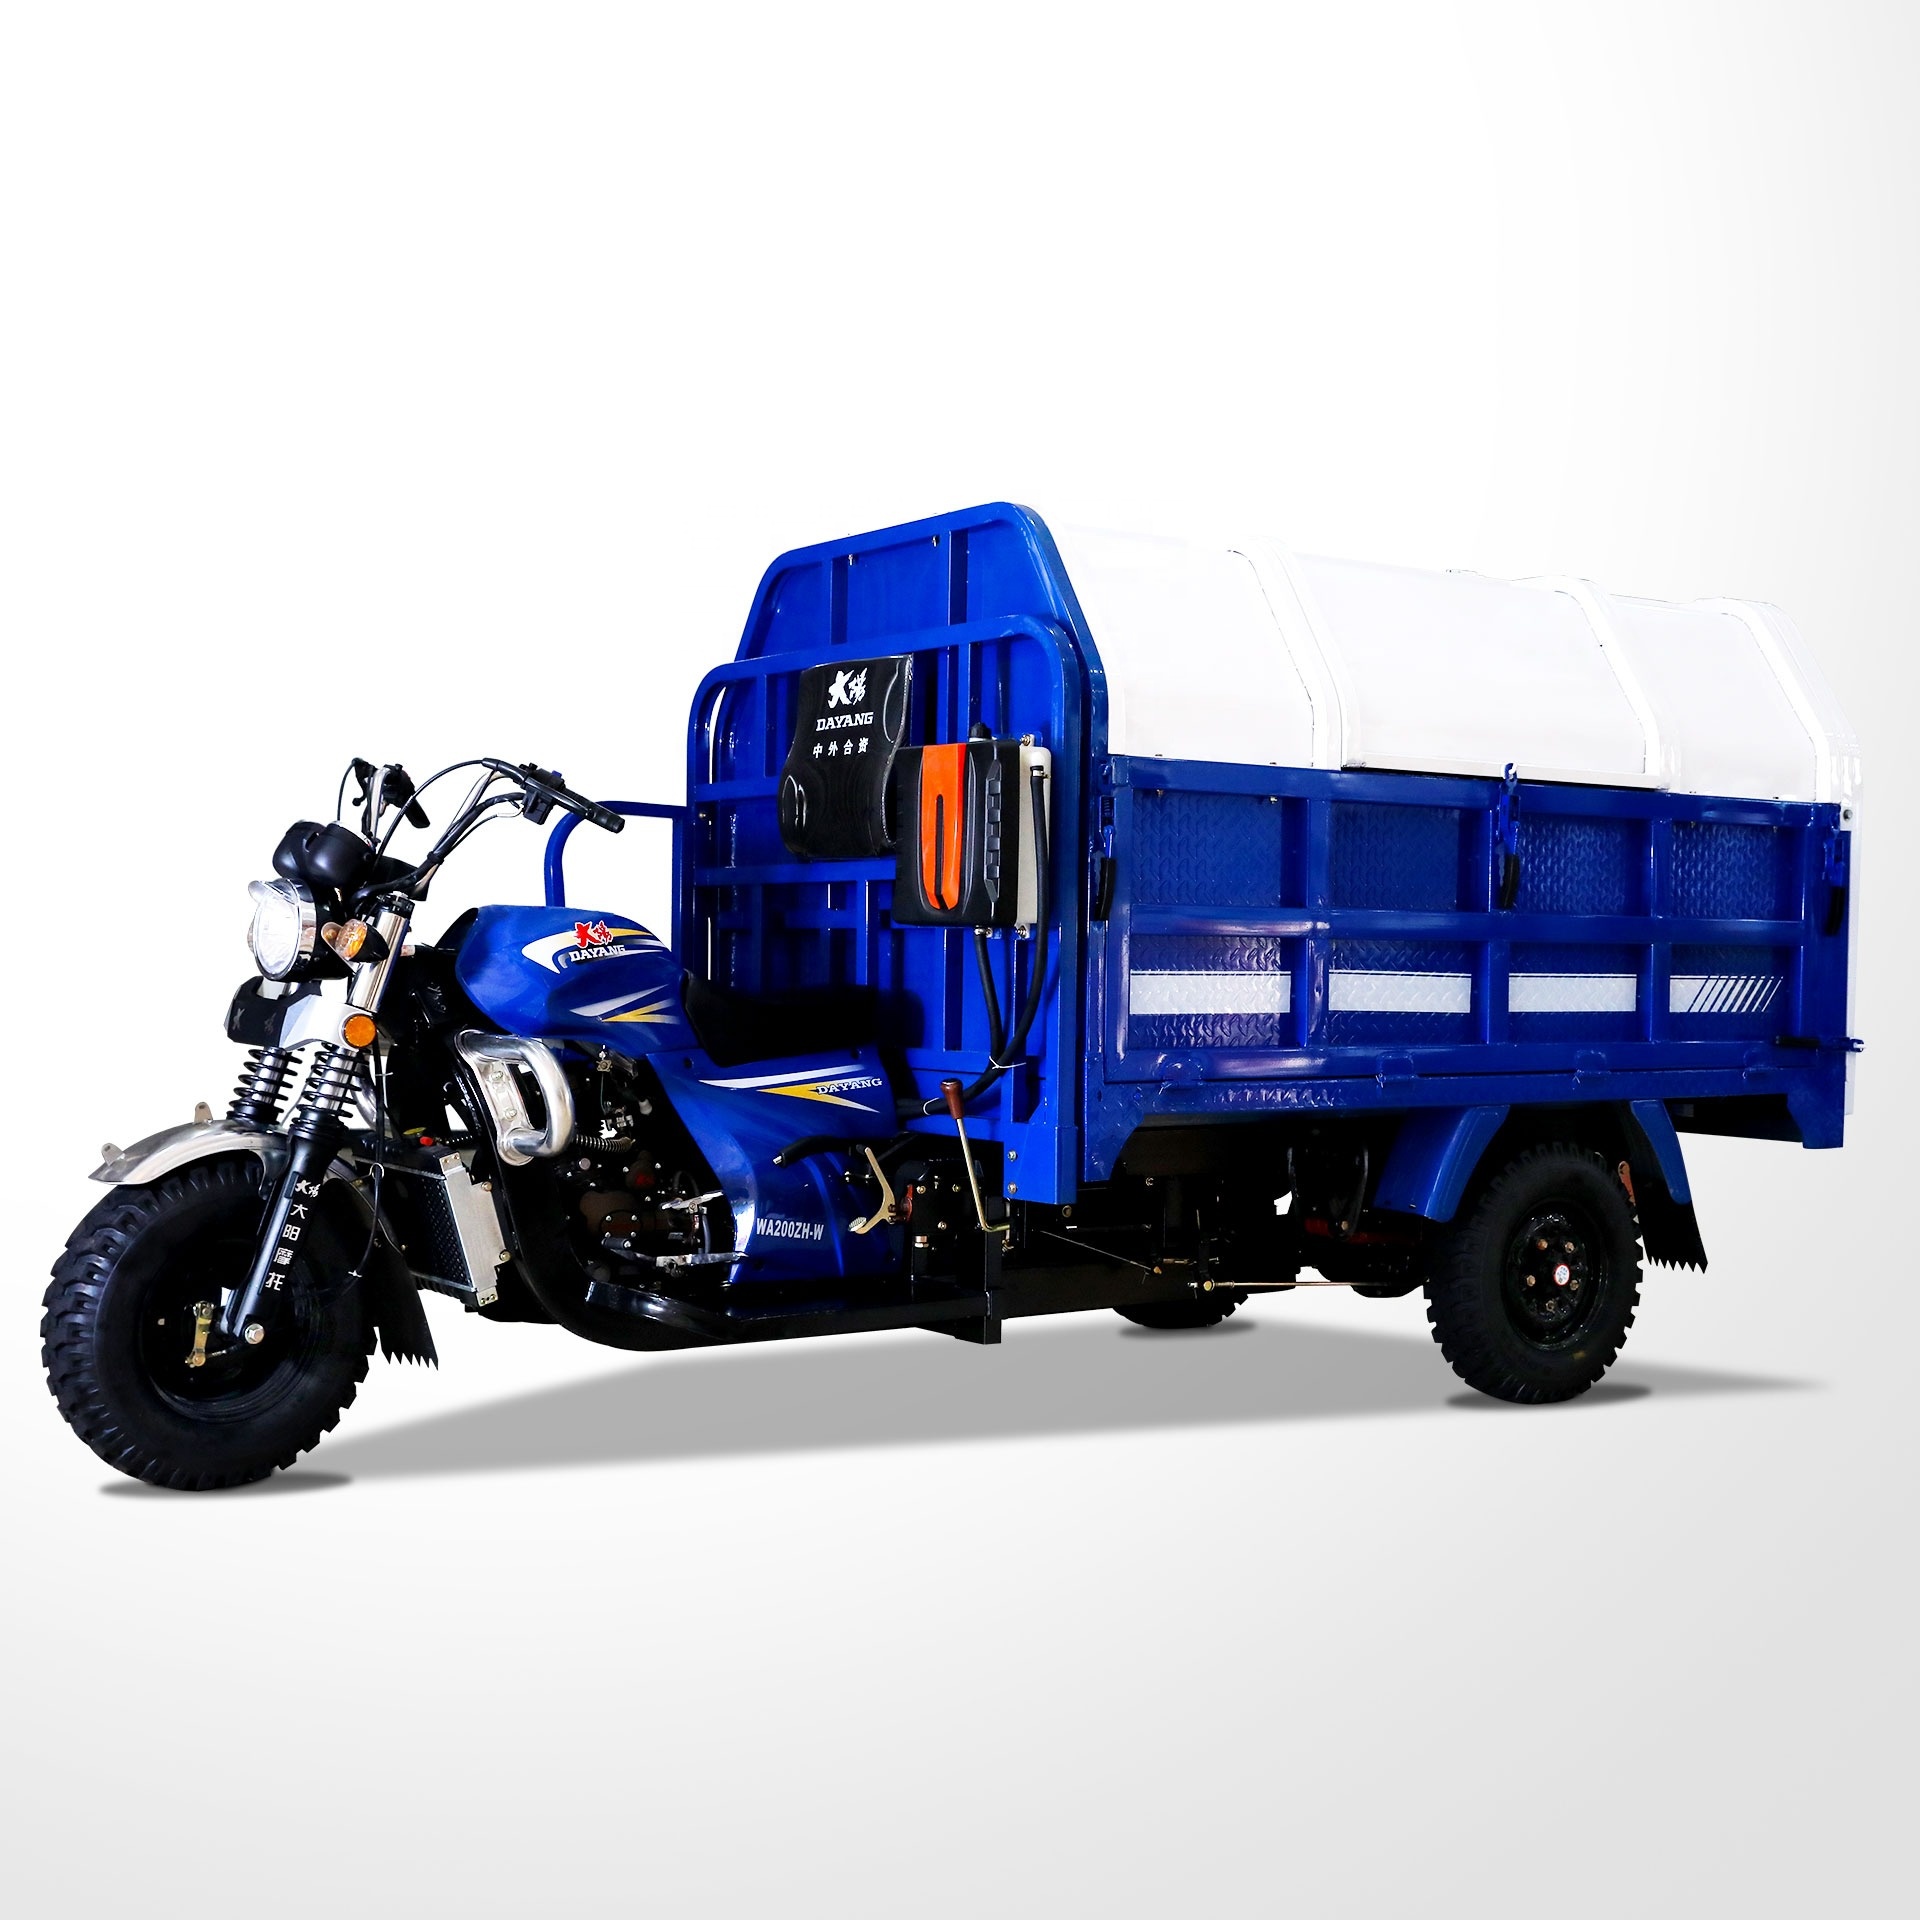 DAYANG Road sanitation cleaning garbage motor tricycle garbage truck tricycle for cargo